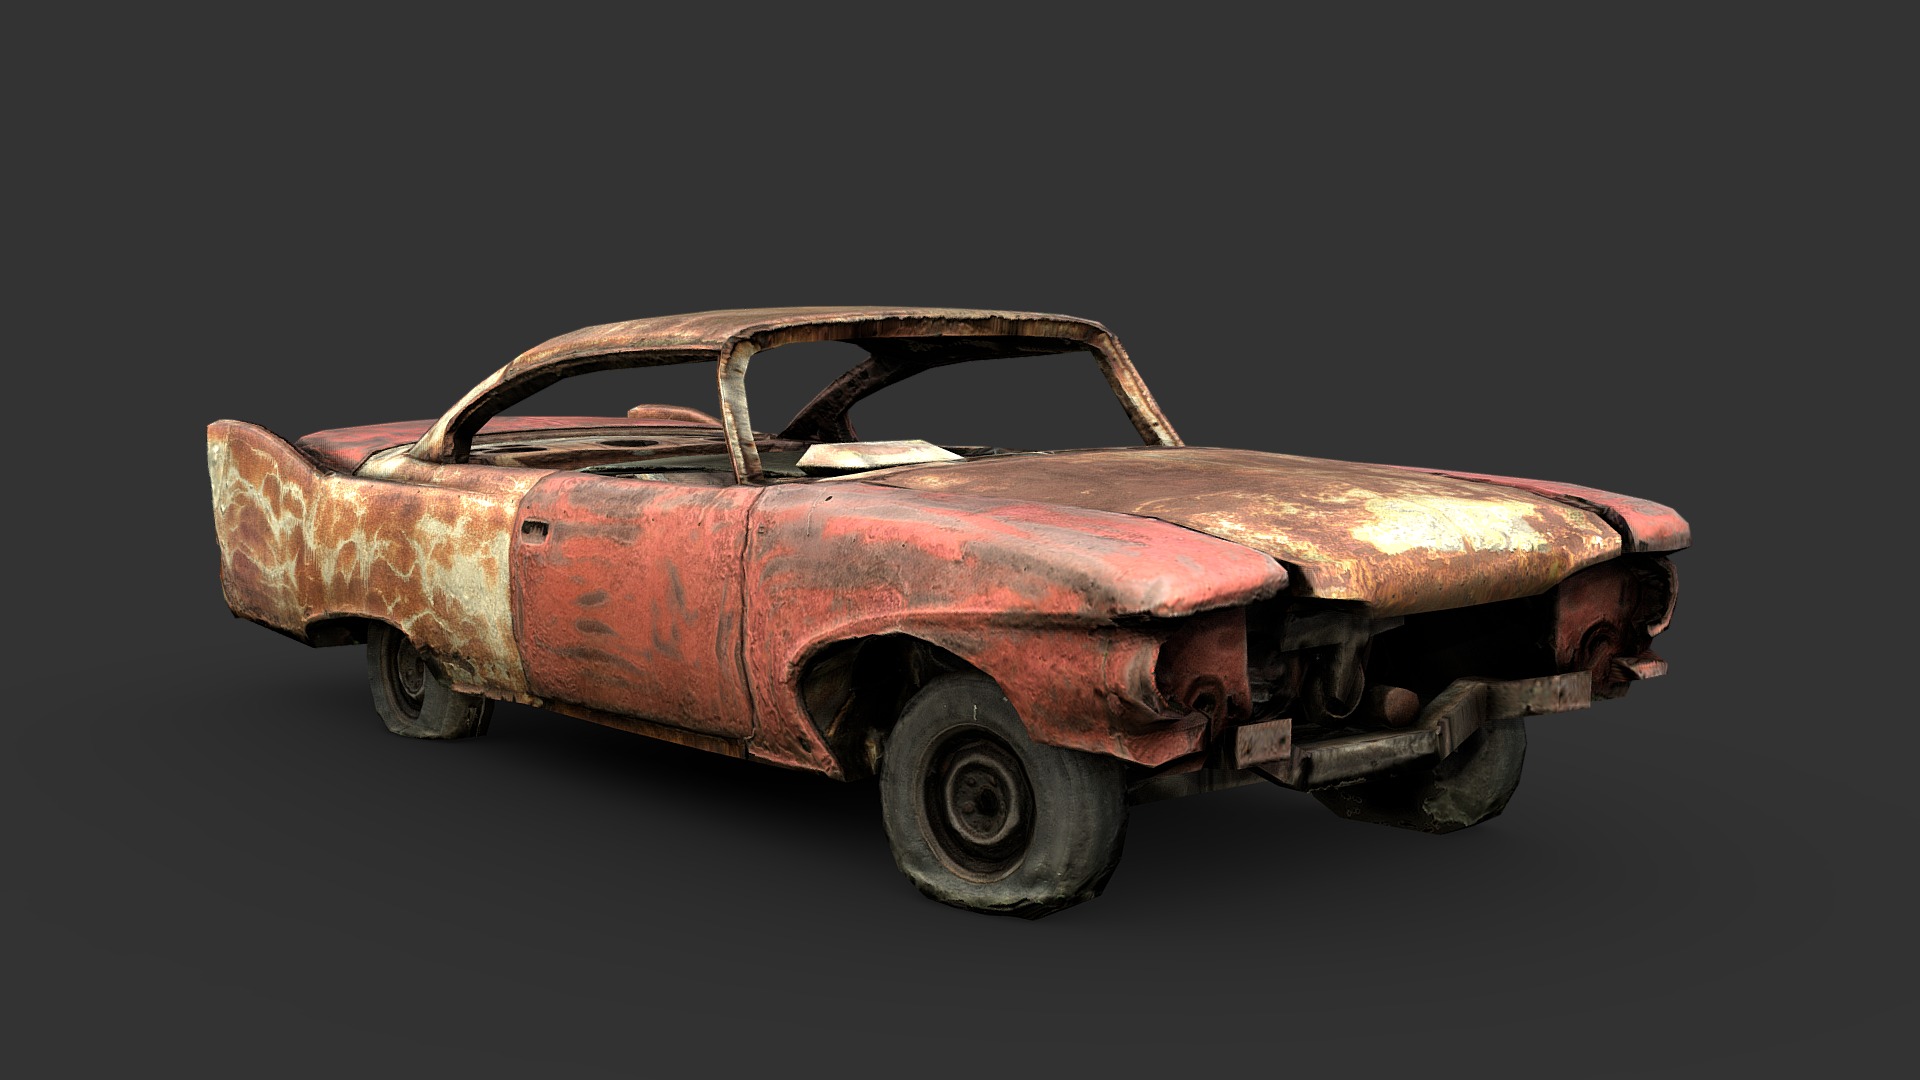 It's got fins! Again, not much left to identify this car with, just another debris-filled wreck.

Made in realitycapture, Topogun, 3DSmax, and Substance Painter - Car Wreck B - 3D model by Renafox (@kryik1023) 3d model